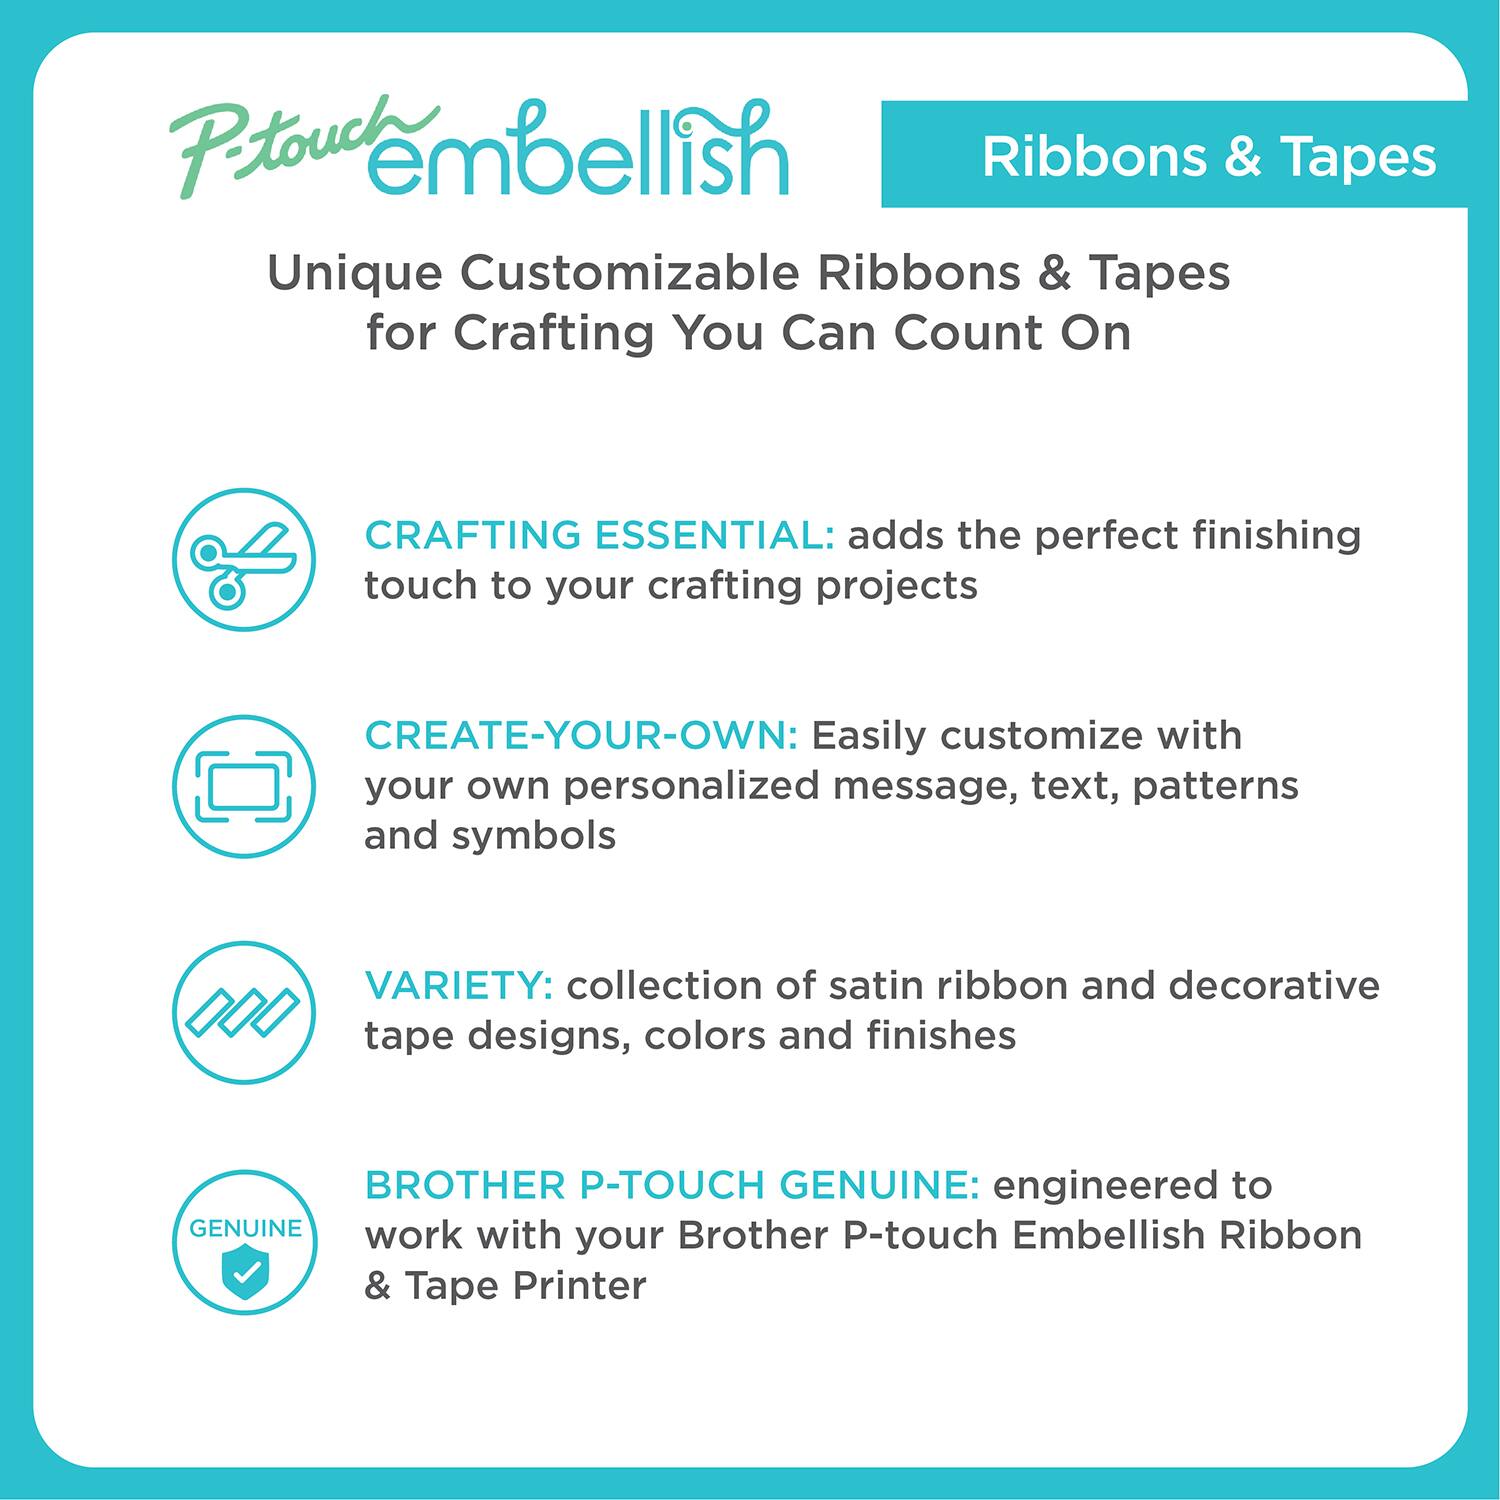 6 Packs: 3 ct. (18 total) Brother P-touch Embellish Multicolor Washi Tape